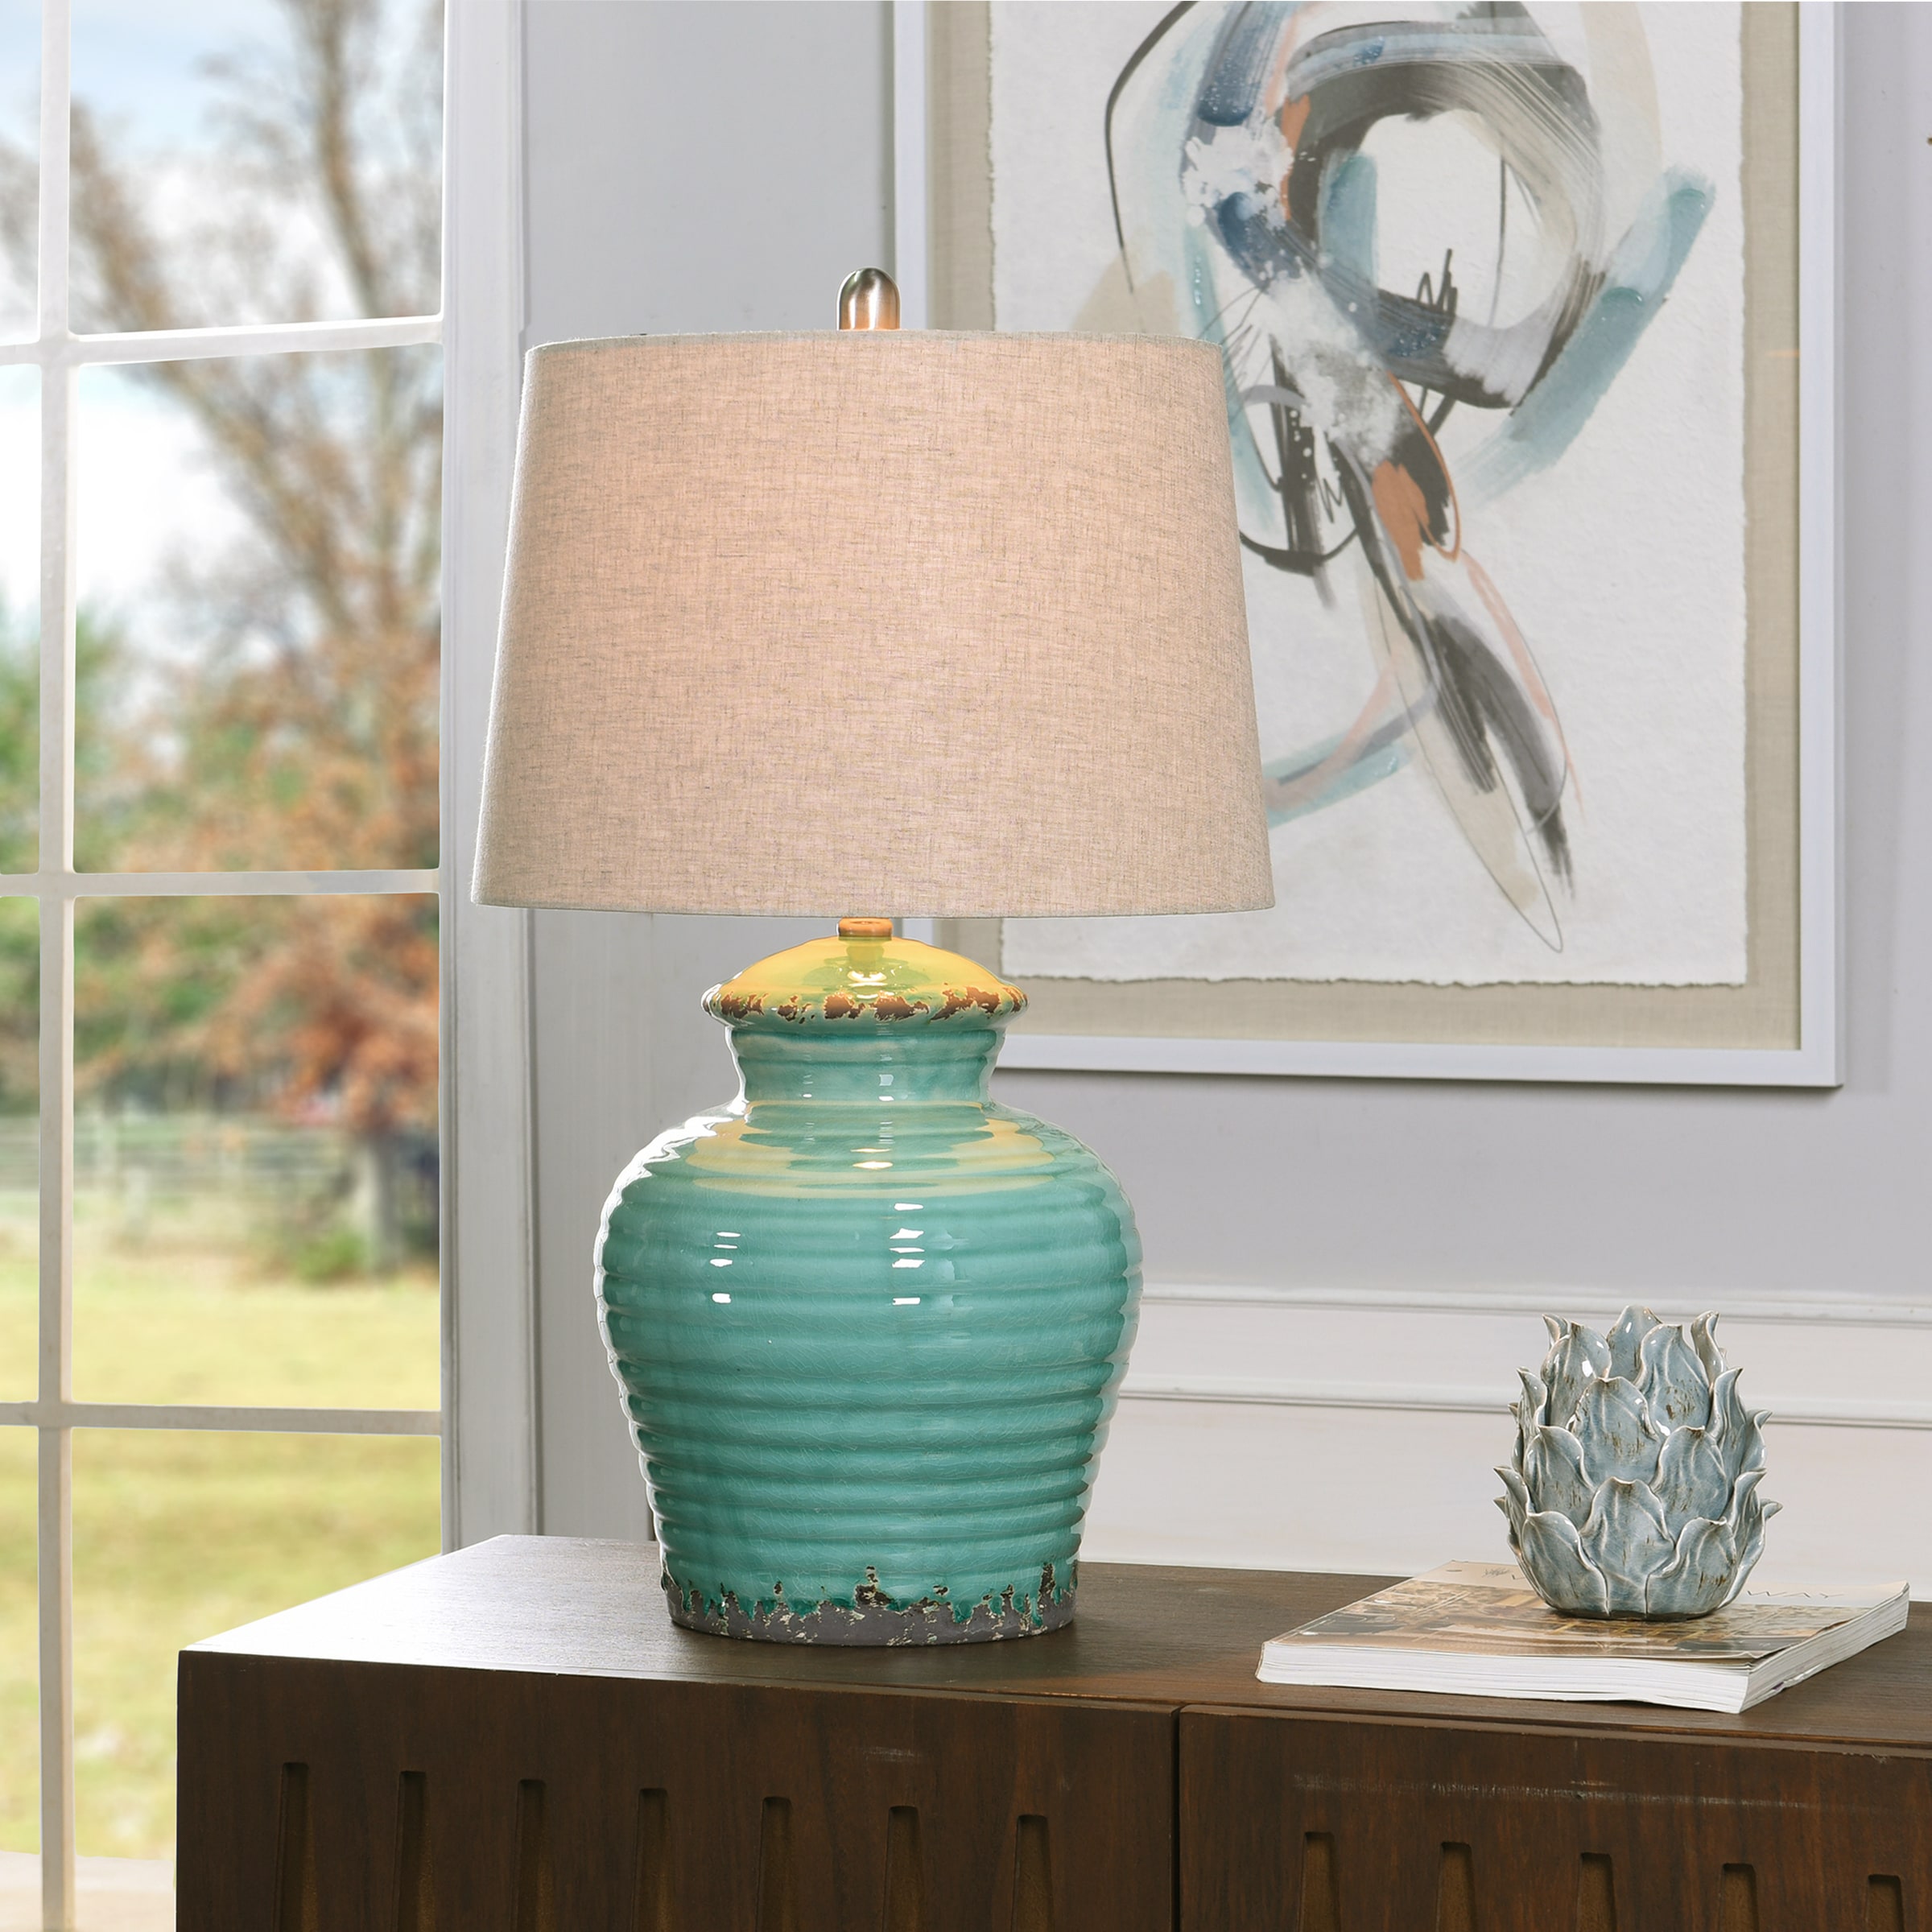 Mesquite & Turquoise Lamp with Ivy Shade (SL-3 GW)